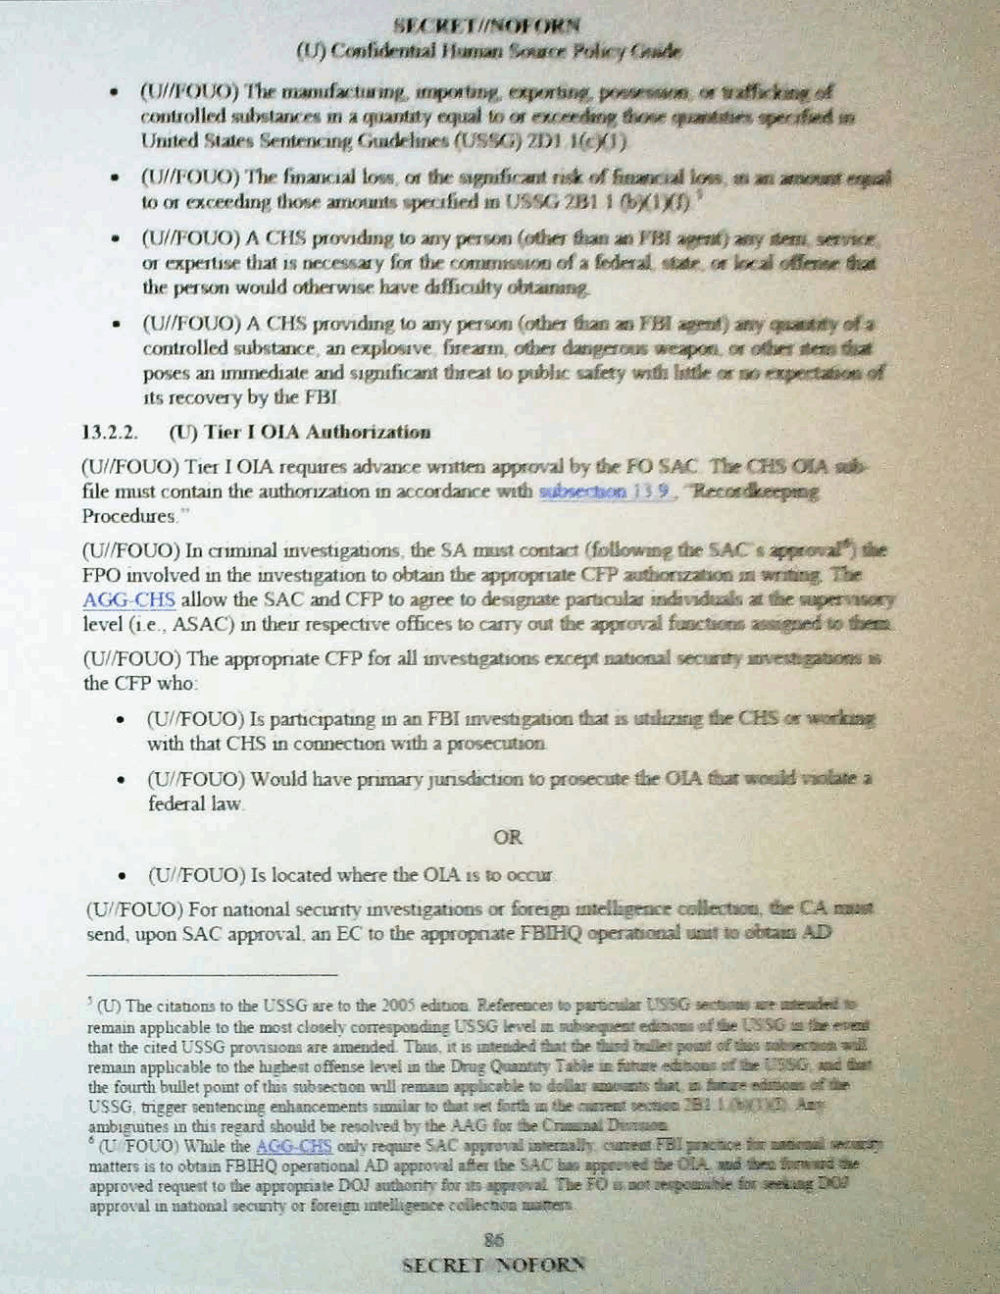 Page 96 from Confidential Human Source Policy Guide